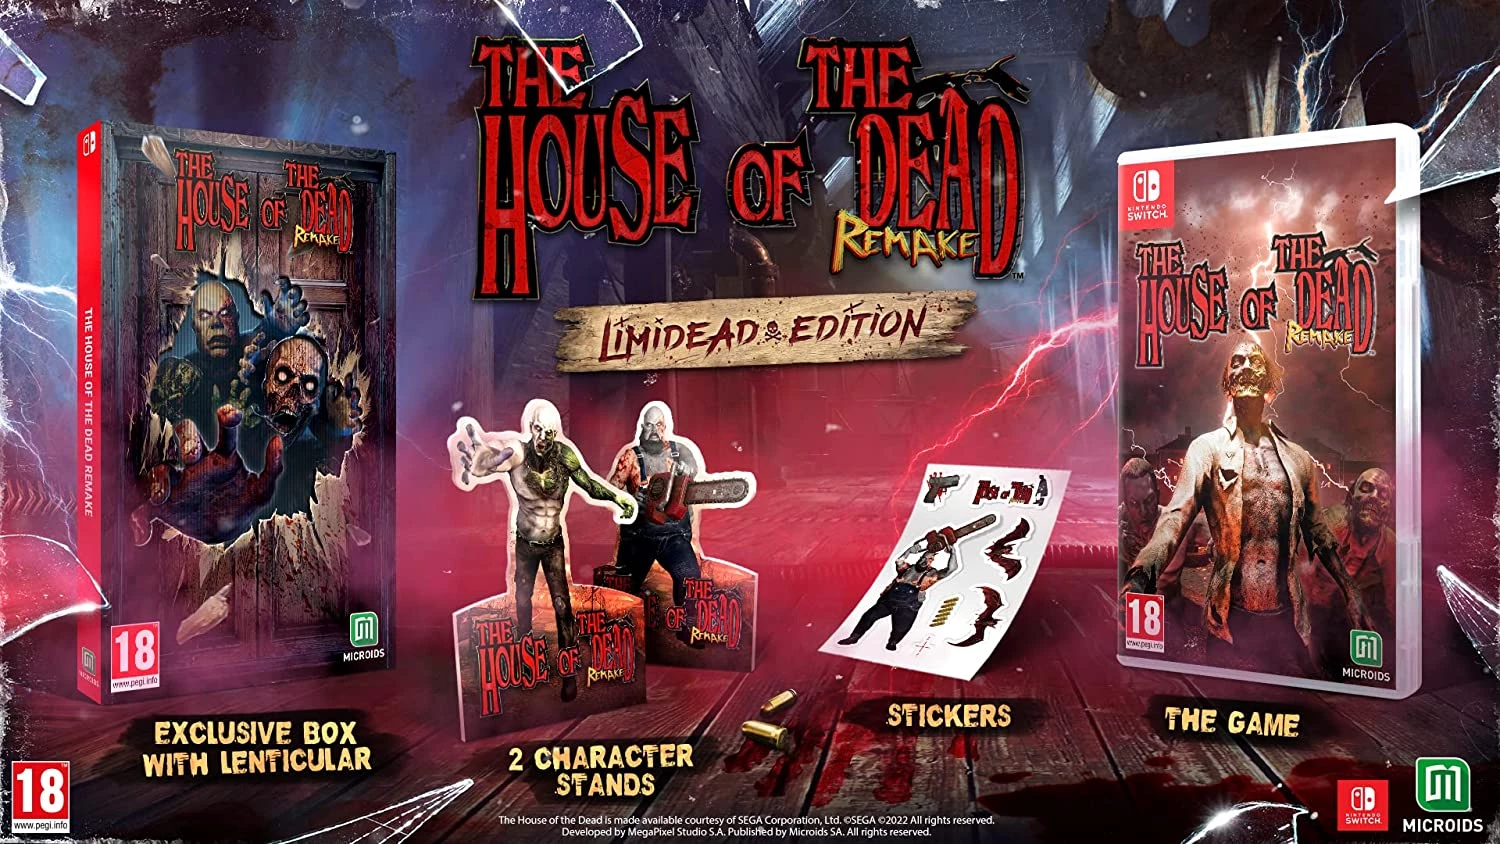 The House of the Dead Remake - Limidead Edition (Switch), MegaPixel Studio